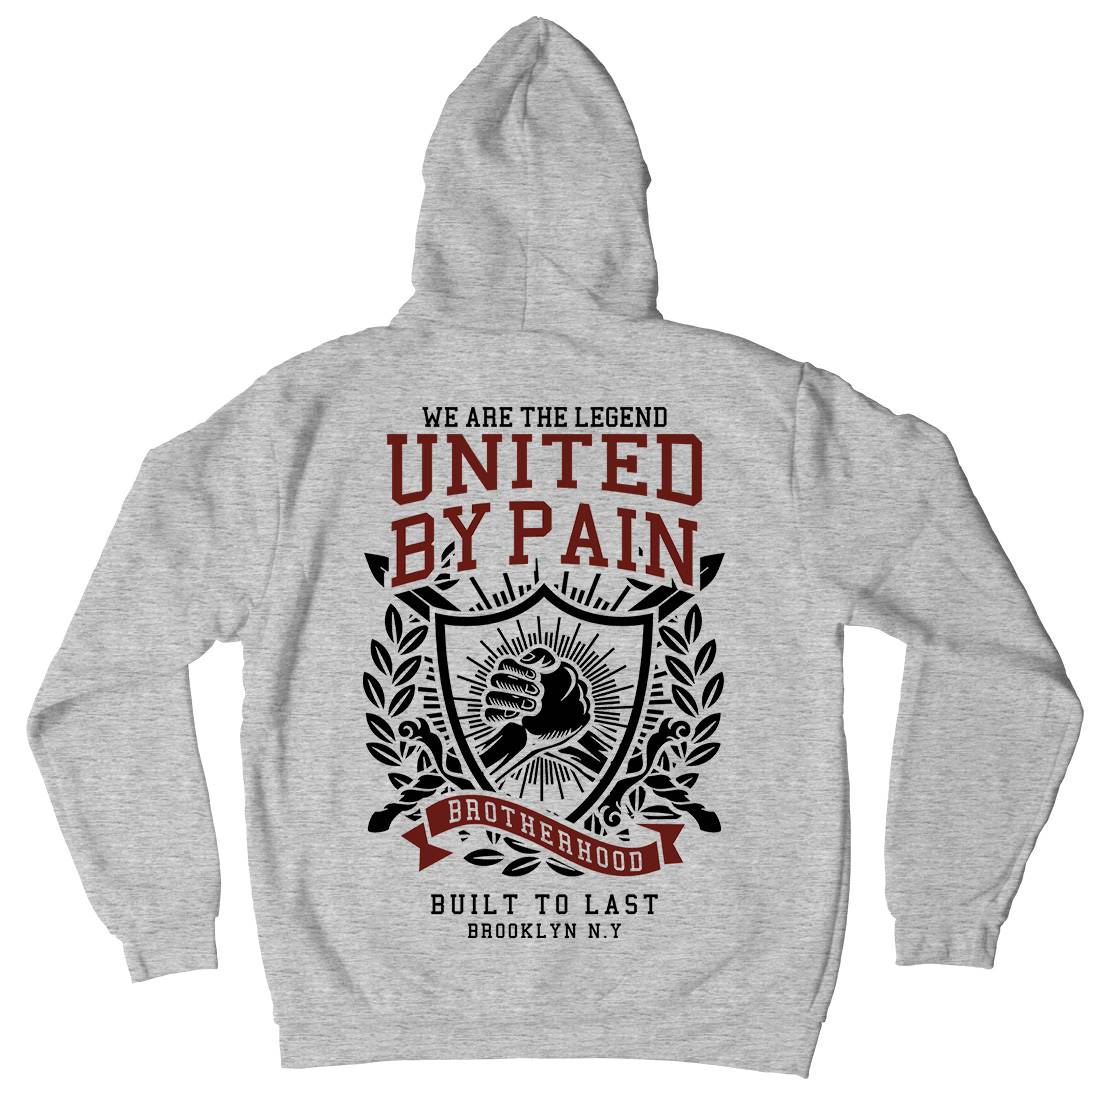 United By Pain Kids Crew Neck Hoodie Gym A297